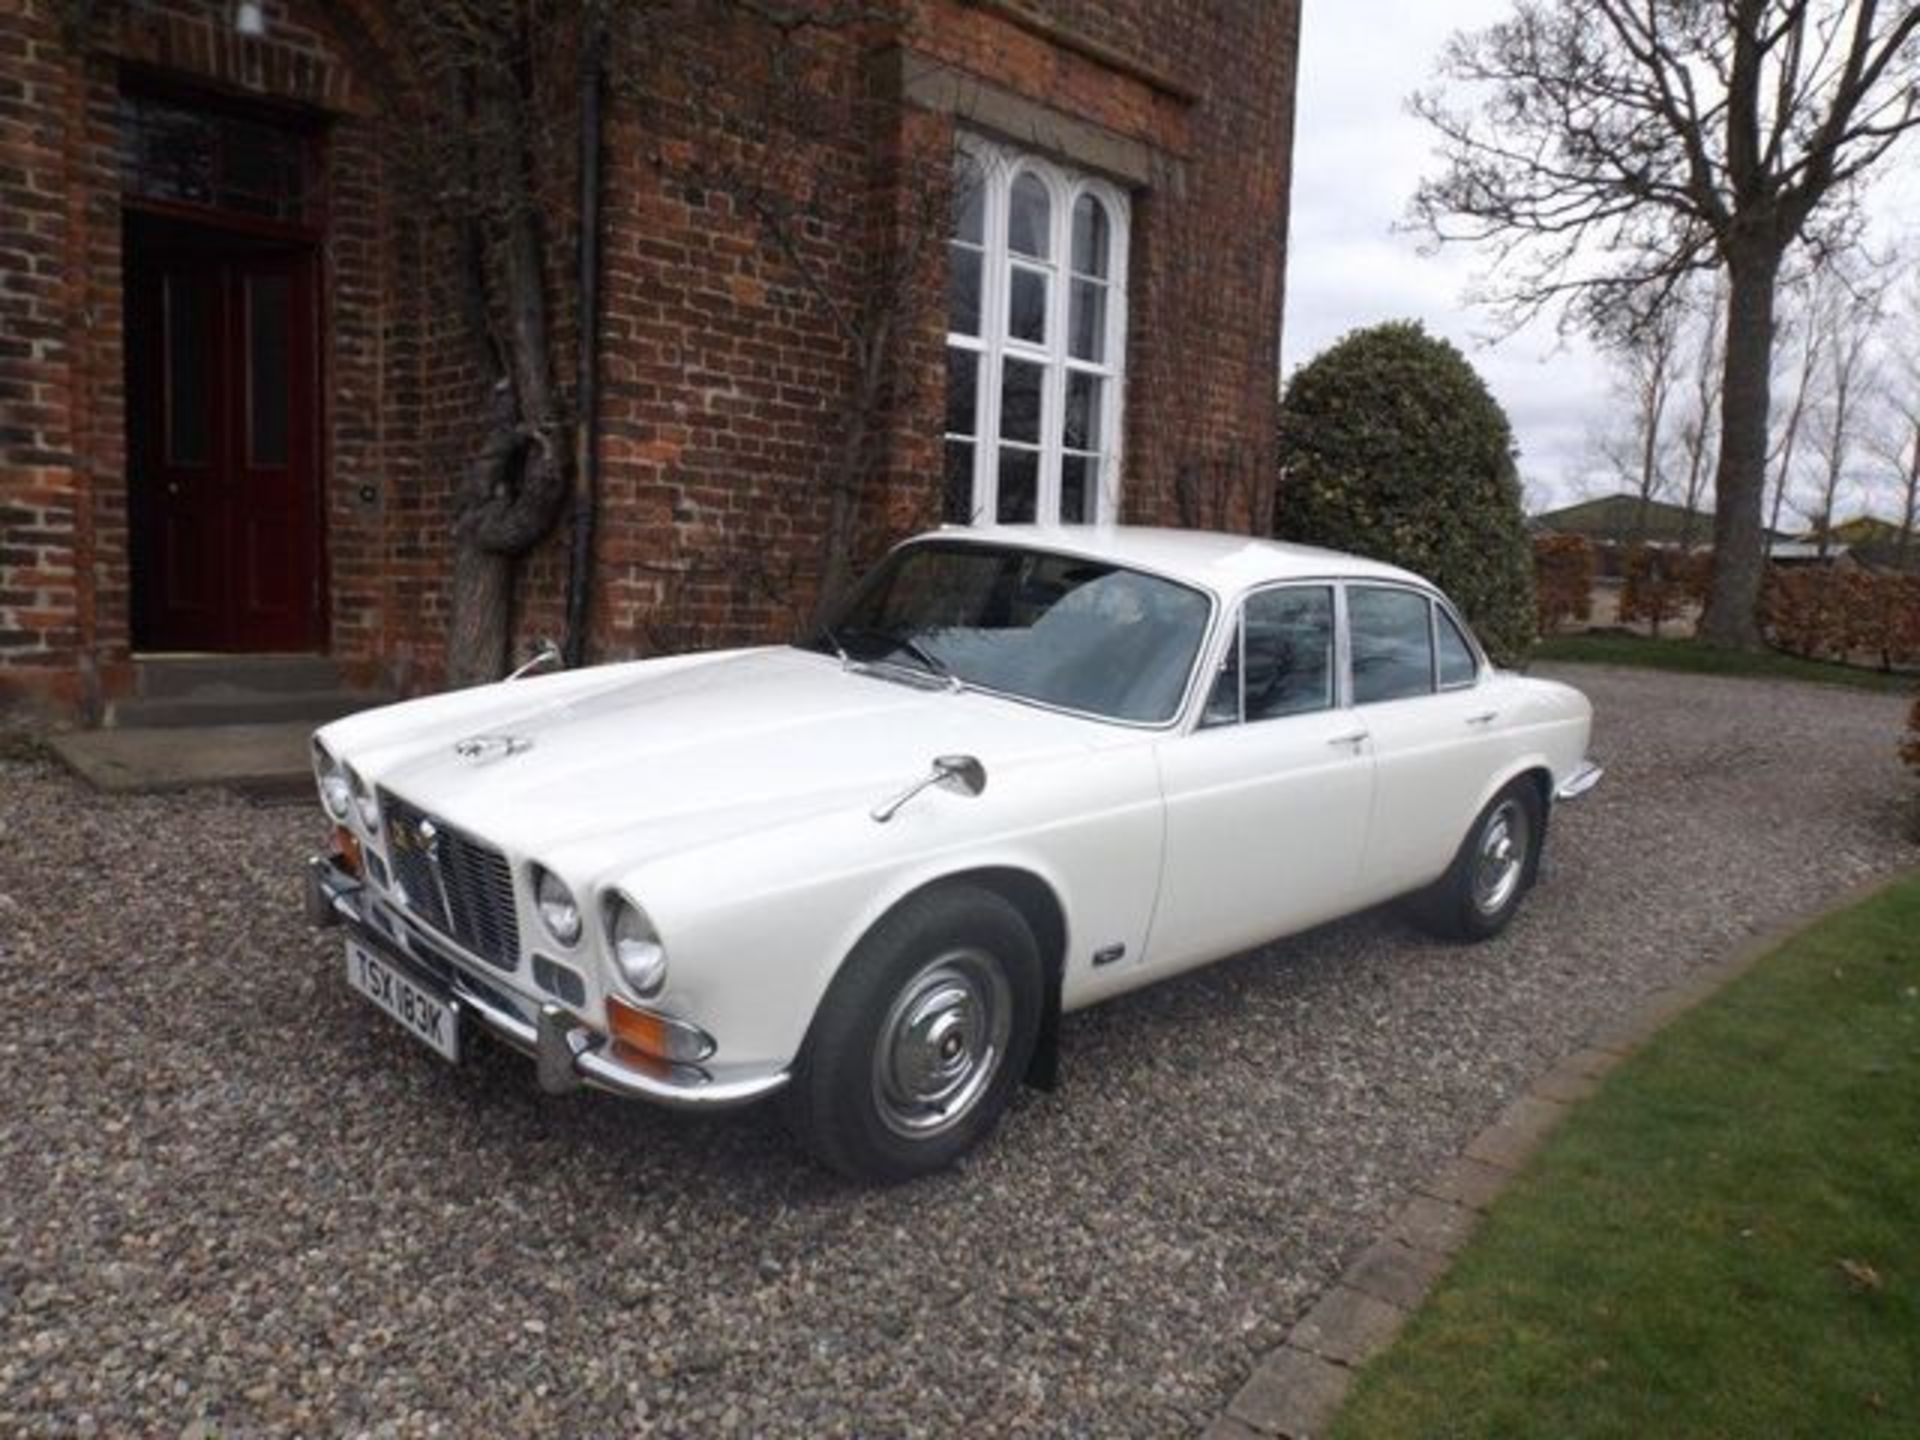 JAGUAR, XJ6 4.2 - 4235cc, Chassis number 1L23839BW - offered with a Northern Irish Vehicle Test